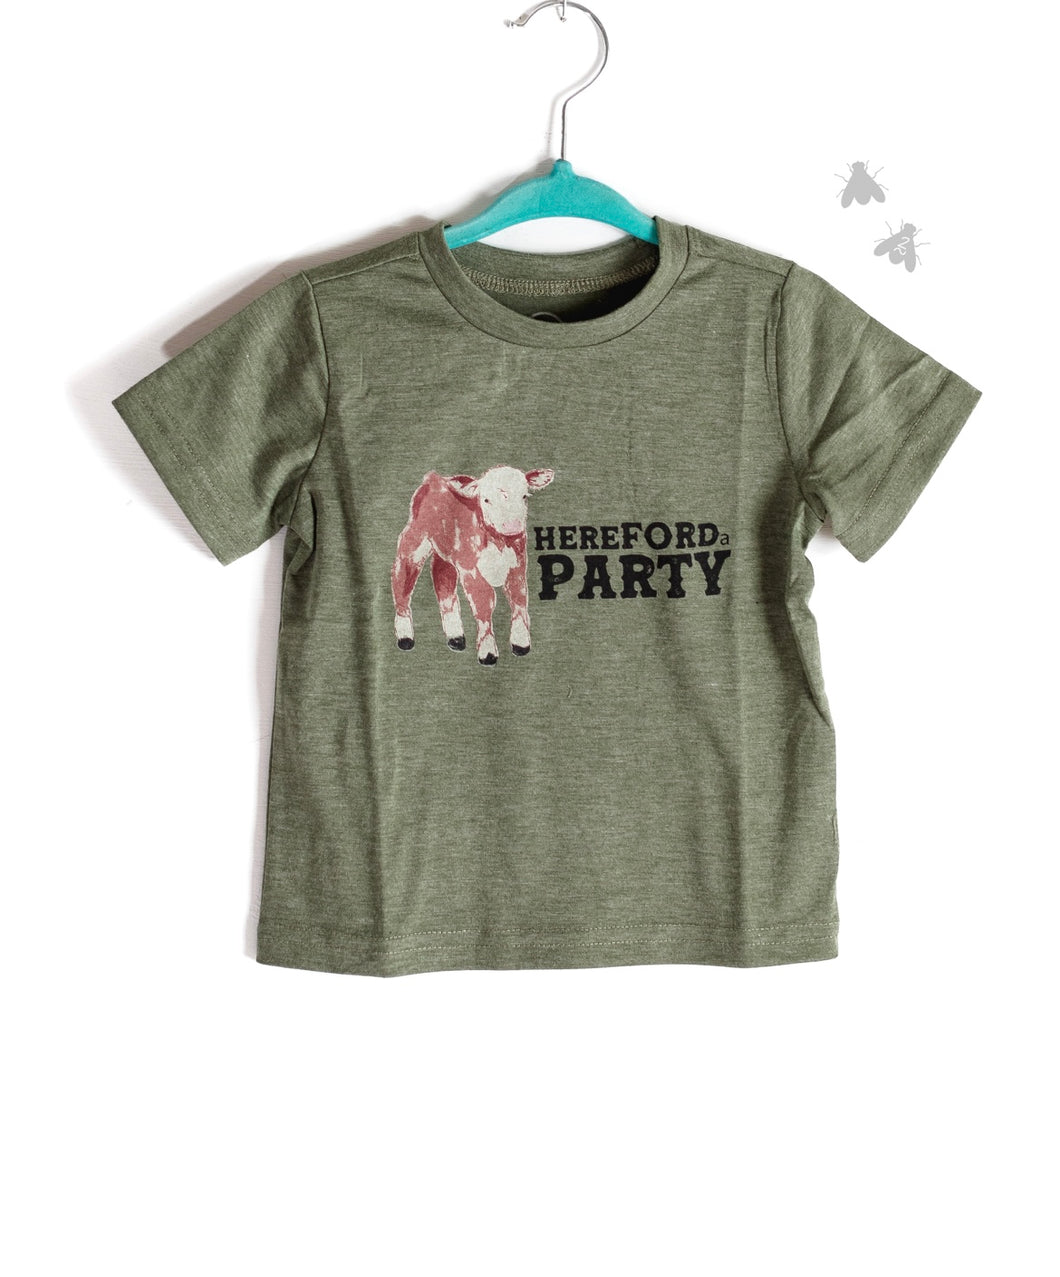 Hereford A Party Tee kids